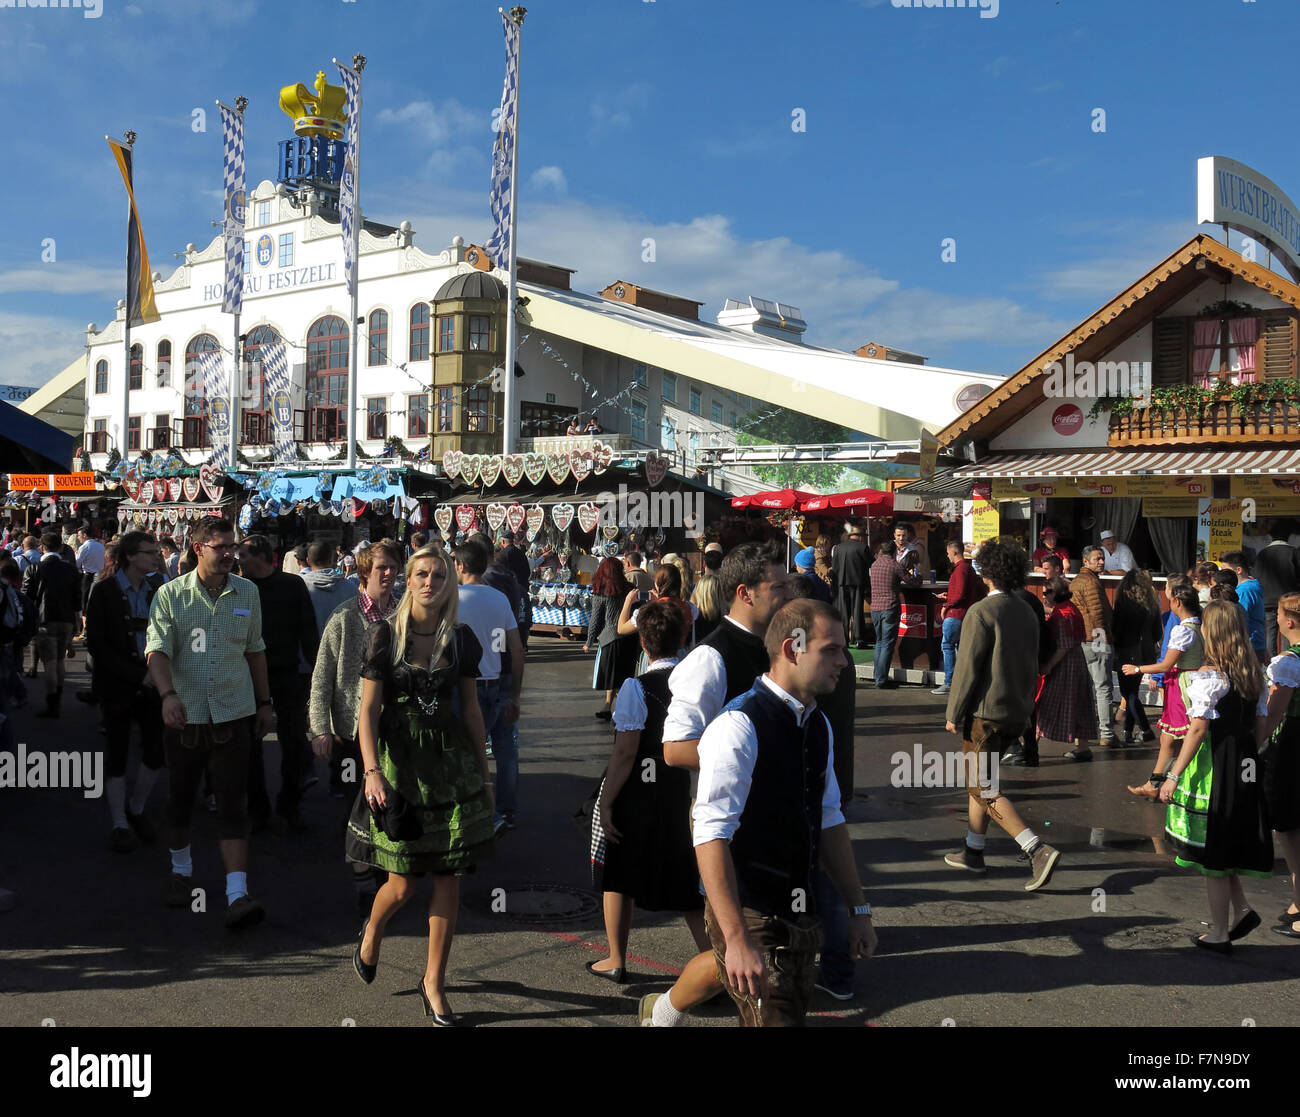 Munich Oktoberfest in Germany  Volksfest beer festival and travelling funfair with crowds Stock Photo